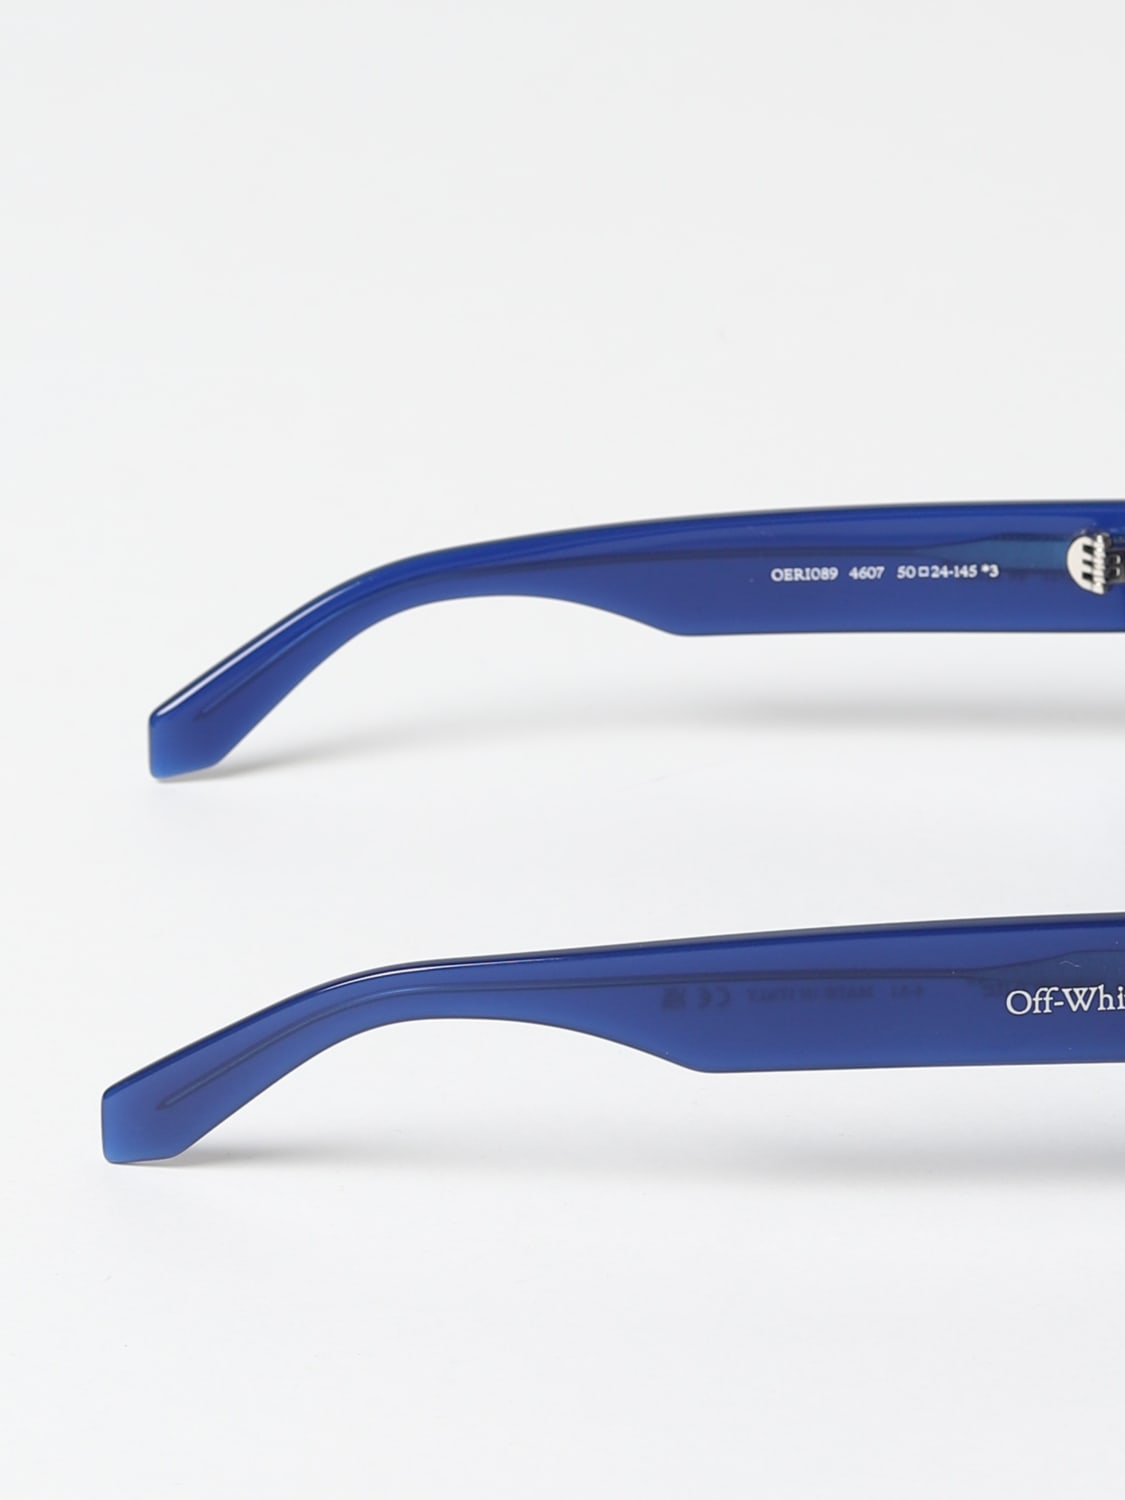 OFF-WHITE: Manchester sunglasses in acetate - Blue  Off-White sunglasses  MANCHESTER SUNGLASSES online at